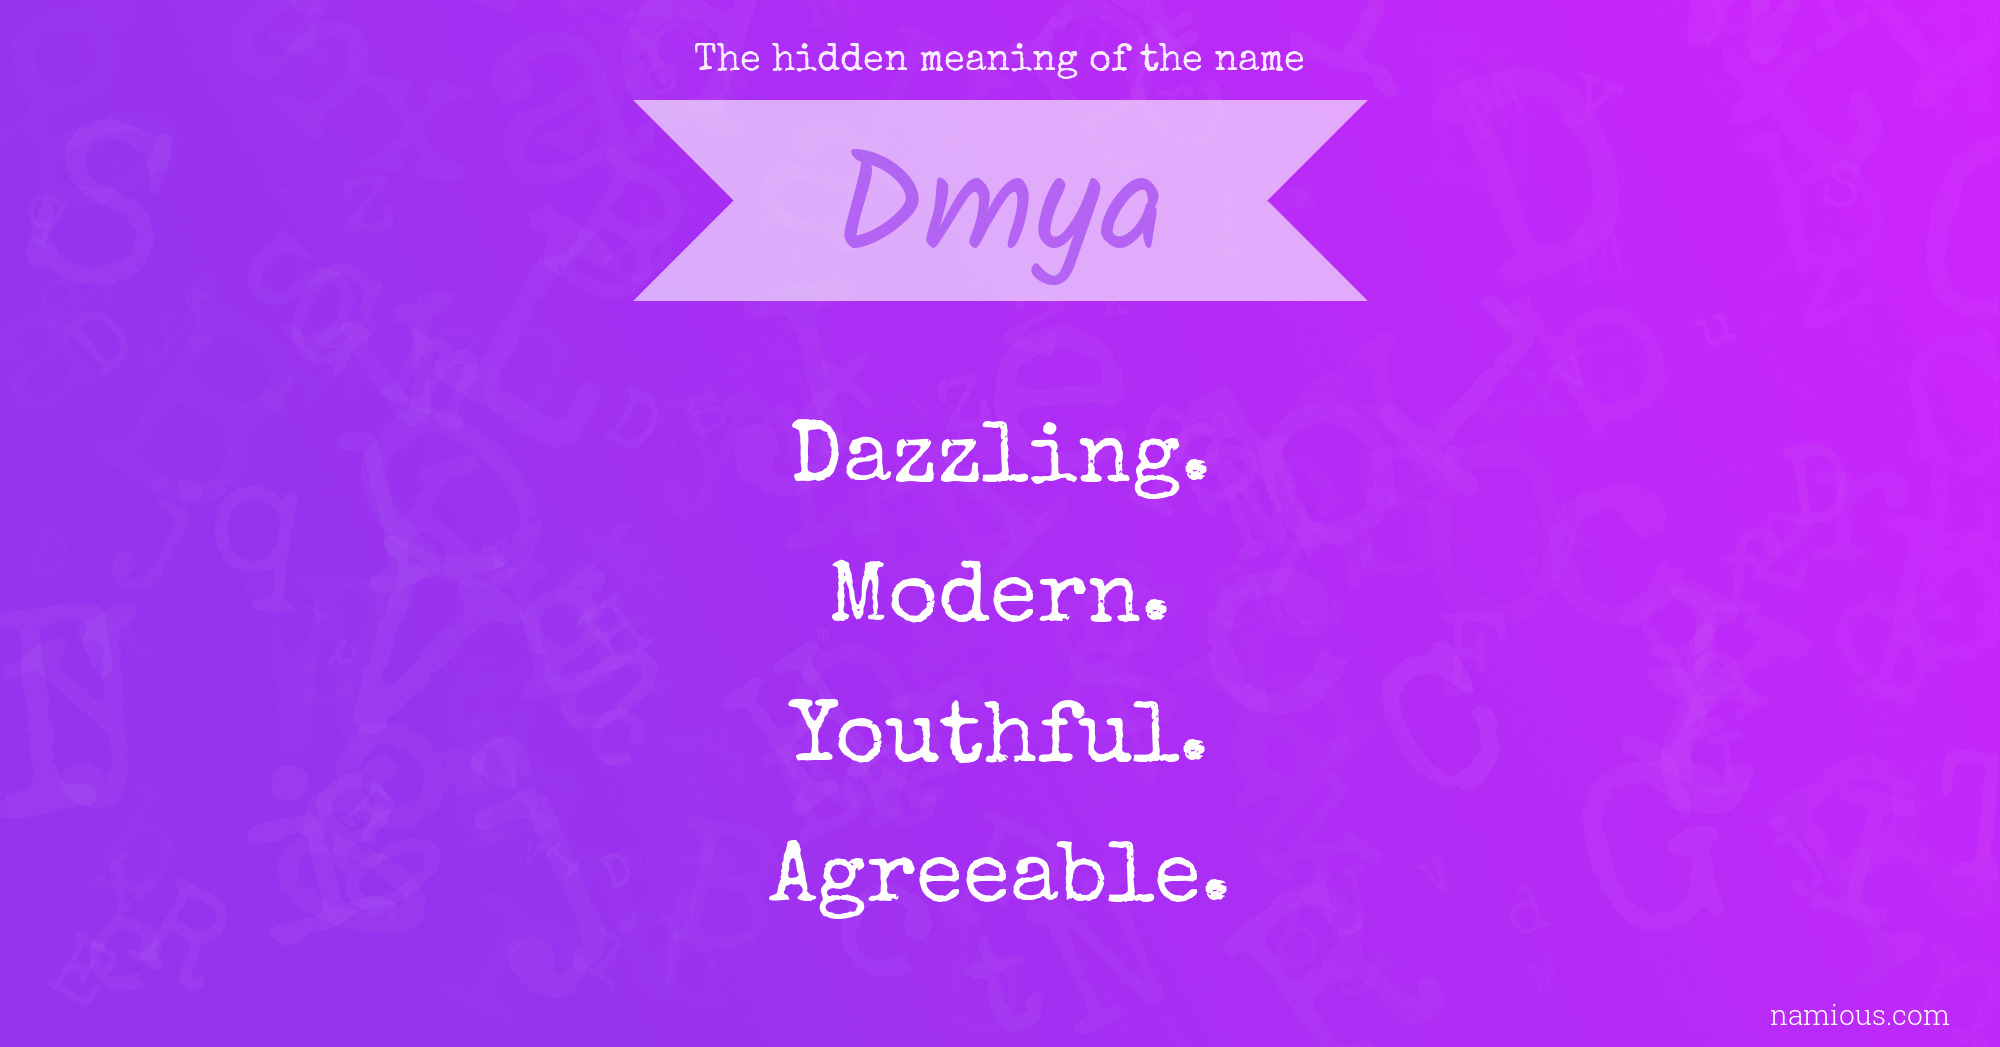 The hidden meaning of the name Dmya